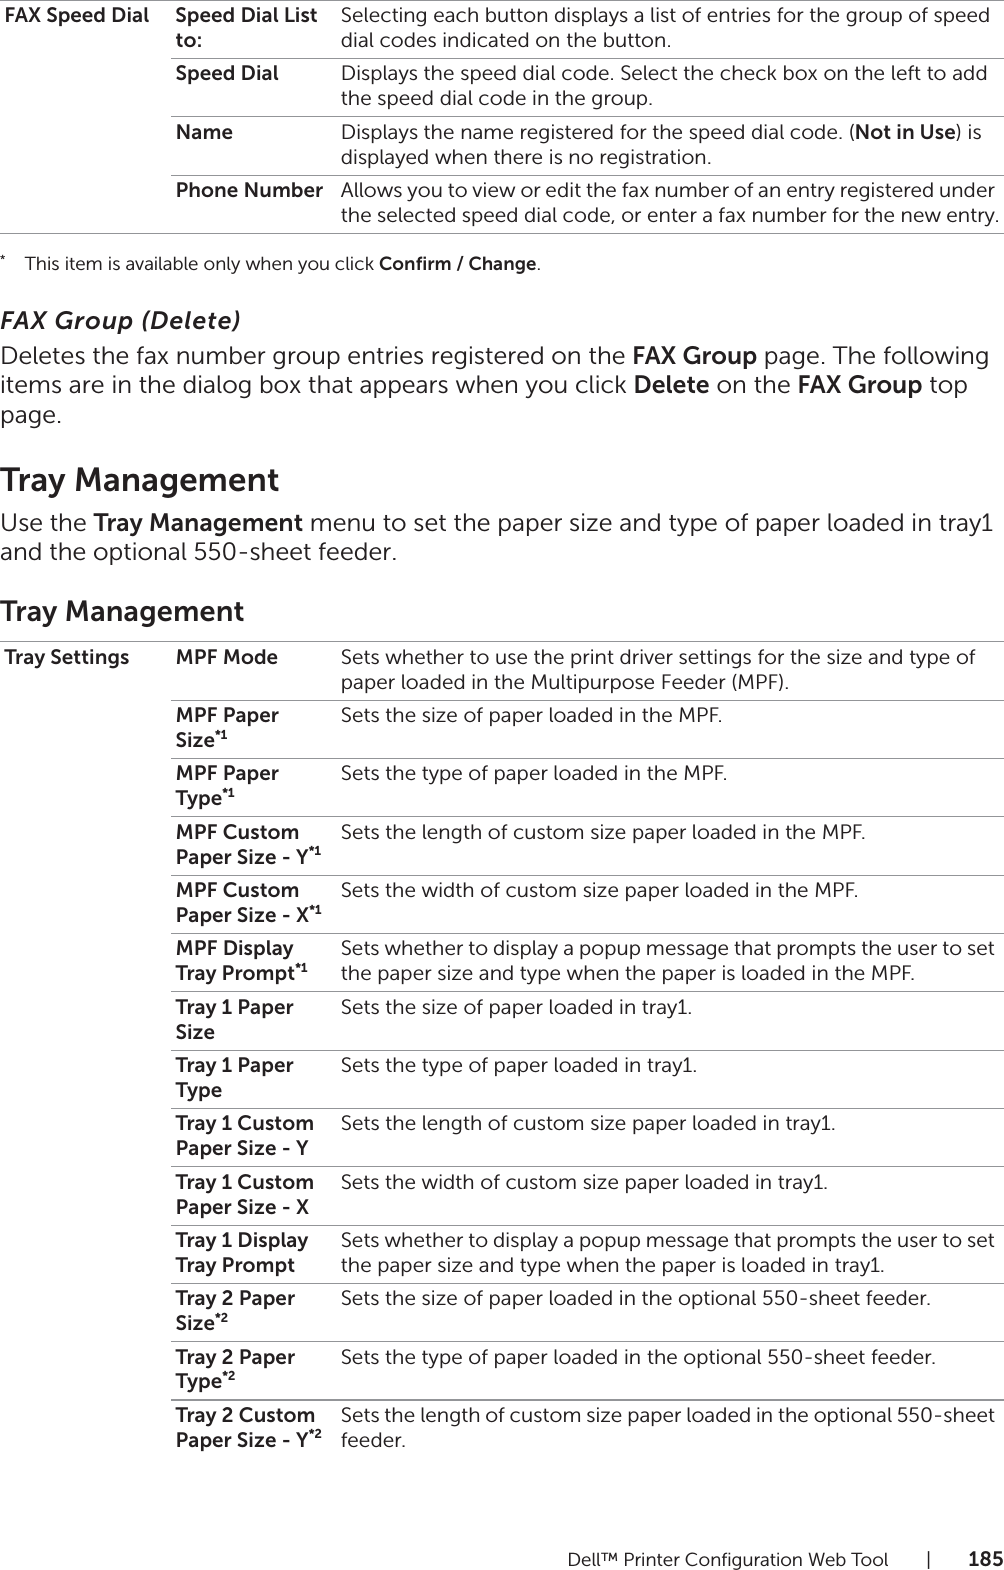 Dell™ Printer Configuration Web Tool |185*This item is available only when you click Confirm / Change.FAX Group (Delete)Deletes the fax number group entries registered on the FAX Group page. The following items are in the dialog box that appears when you click Delete on the FAX Group top page.Tray ManagementUse the Tray Management menu to set the paper size and type of paper loaded in tray1 and the optional 550-sheet feeder.Tray ManagementFAX Speed Dial Speed Dial List to:Selecting each button displays a list of entries for the group of speed dial codes indicated on the button.Speed Dial Displays the speed dial code. Select the check box on the left to add the speed dial code in the group.Name Displays the name registered for the speed dial code. (Not in Use) is displayed when there is no registration.Phone Number Allows you to view or edit the fax number of an entry registered under the selected speed dial code, or enter a fax number for the new entry.Tray Settings MPF Mode Sets whether to use the print driver settings for the size and type of paper loaded in the Multipurpose Feeder (MPF).MPF Paper Size*1Sets the size of paper loaded in the MPF.MPF Paper Type*1Sets the type of paper loaded in the MPF.MPF Custom Paper Size - Y*1Sets the length of custom size paper loaded in the MPF.MPF Custom Paper Size - X*1Sets the width of custom size paper loaded in the MPF.MPF Display Tray Prompt*1Sets whether to display a popup message that prompts the user to set the paper size and type when the paper is loaded in the MPF.Tray 1 Paper SizeSets the size of paper loaded in tray1.Tray 1 Paper TypeSets the type of paper loaded in tray1.Tray 1 Custom Paper Size - YSets the length of custom size paper loaded in tray1.Tray 1 Custom Paper Size - XSets the width of custom size paper loaded in tray1.Tray 1 Display Tray PromptSets whether to display a popup message that prompts the user to set the paper size and type when the paper is loaded in tray1.Tray 2 Paper Size*2Sets the size of paper loaded in the optional 550-sheet feeder.Tray 2 Paper Type*2Sets the type of paper loaded in the optional 550-sheet feeder.Tray 2 Custom Paper Size - Y*2Sets the length of custom size paper loaded in the optional 550-sheet feeder.